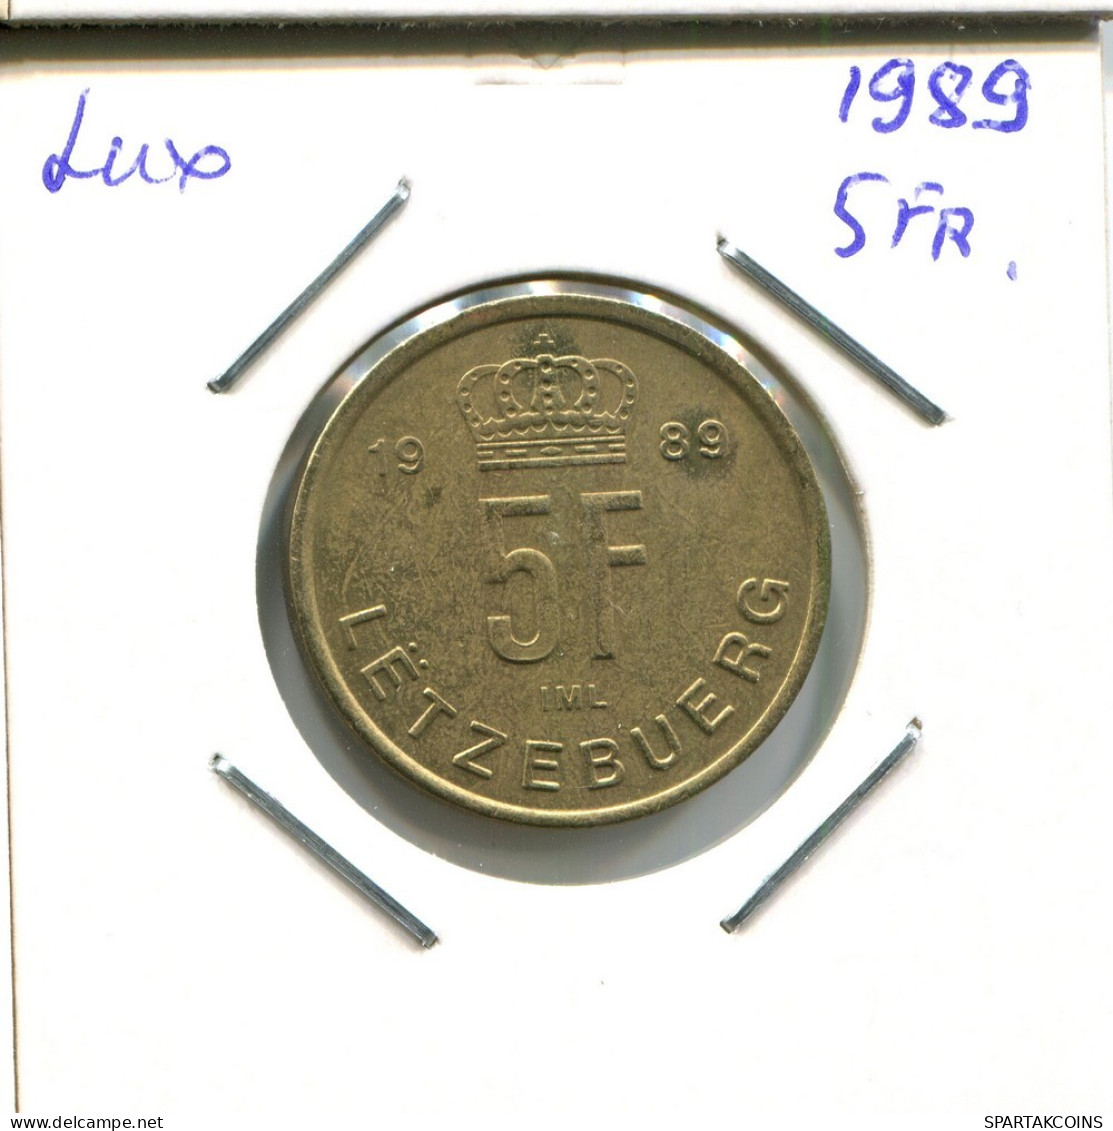 5 FRANCS 1989 LUXEMBURG LUXEMBOURG Münze #AT236.D.A - Luxemburgo